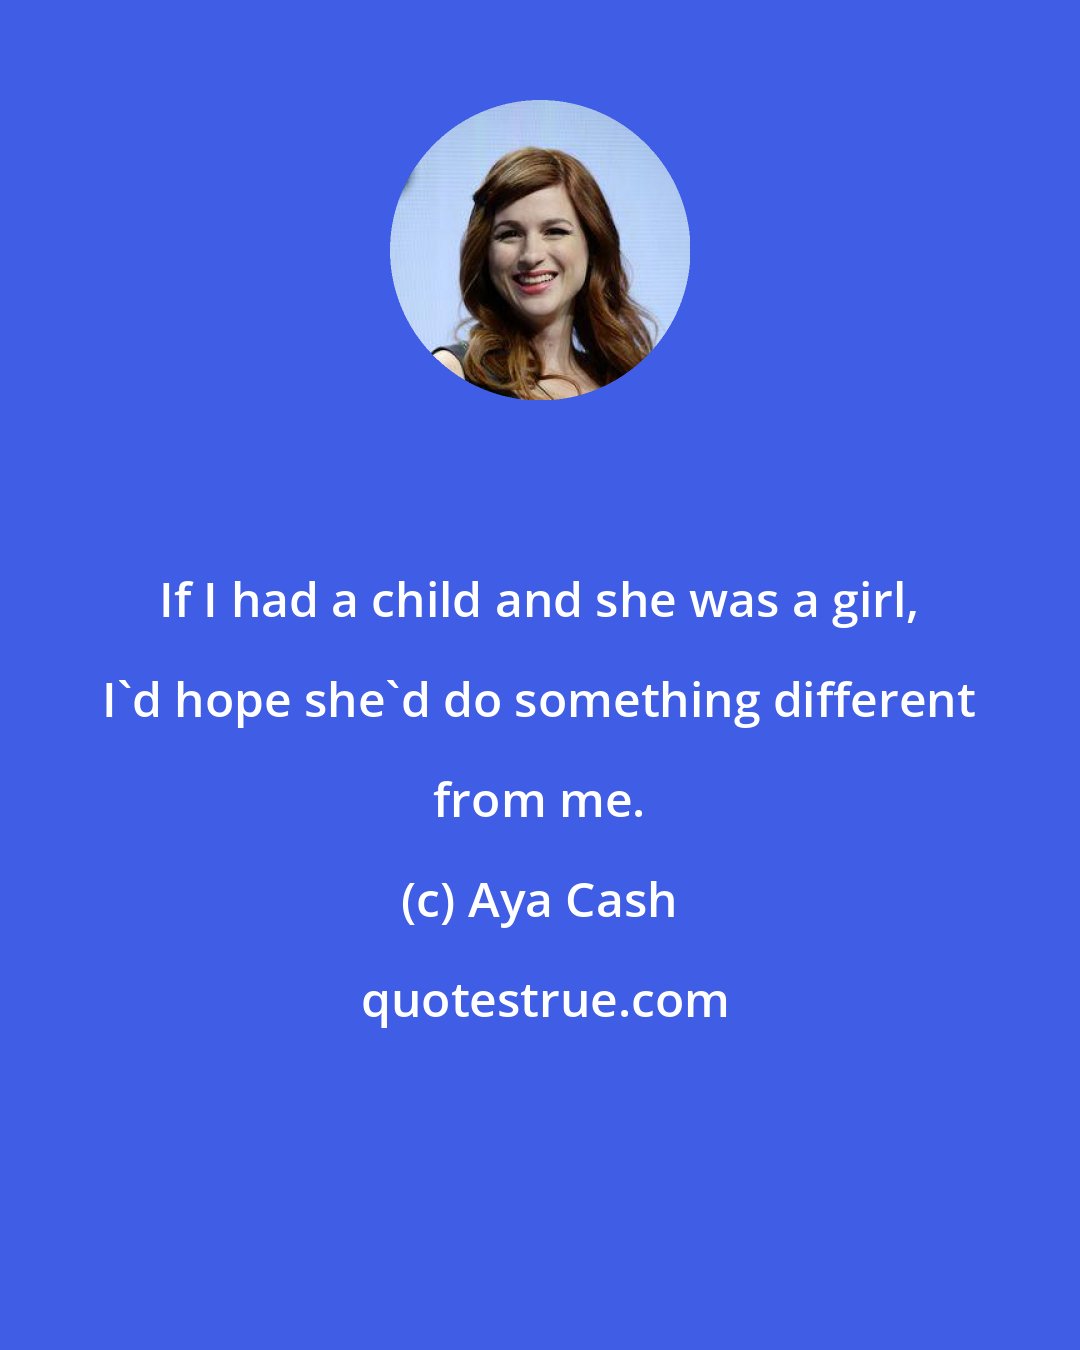 Aya Cash: If I had a child and she was a girl, I'd hope she'd do something different from me.